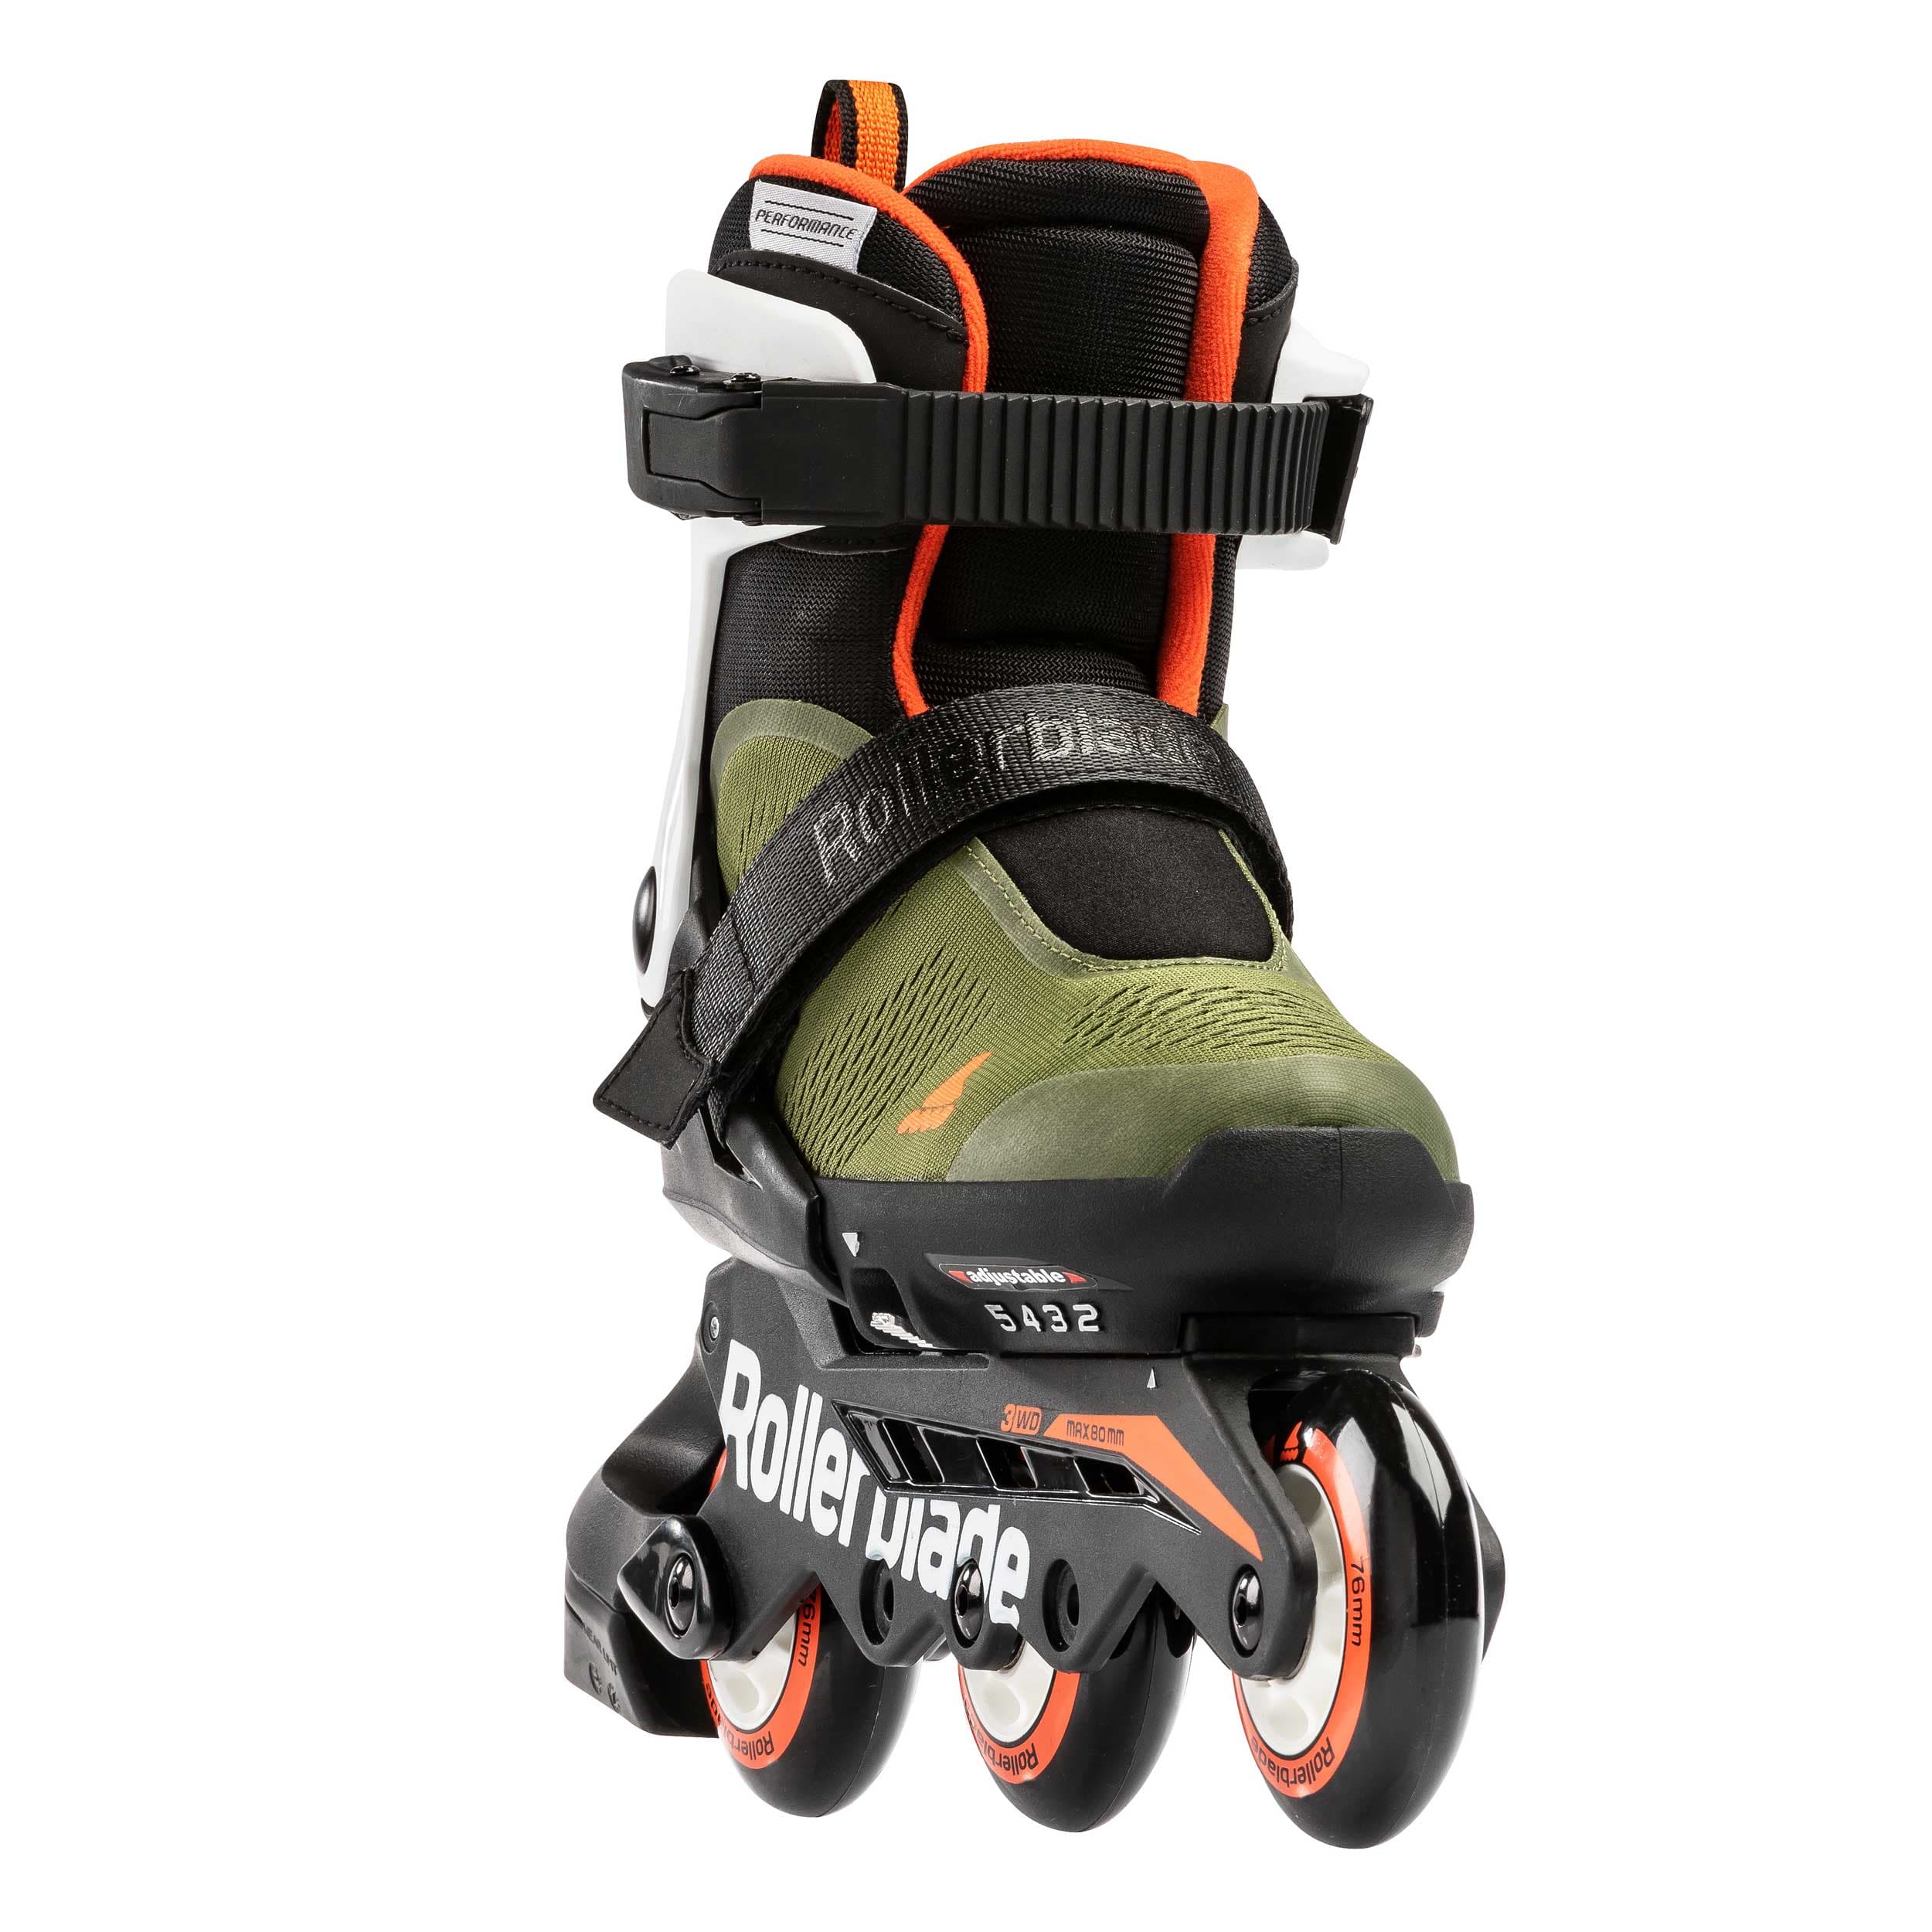 rollerblade-microblade-3wd-skates-front-view